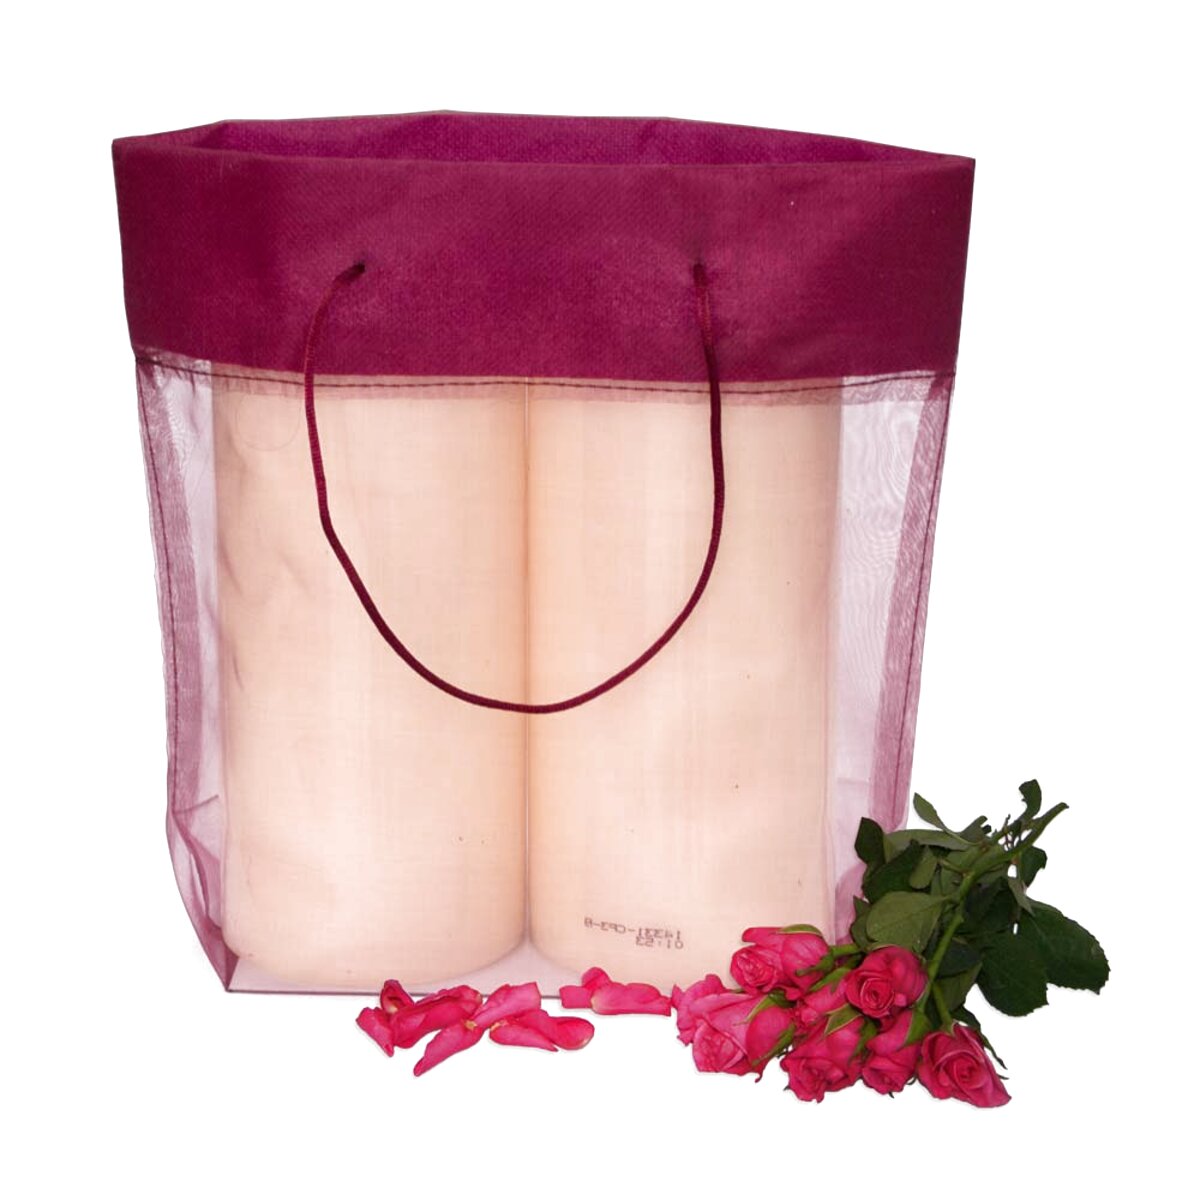 Organza Gift Bags for sale in UK View 62 bargains